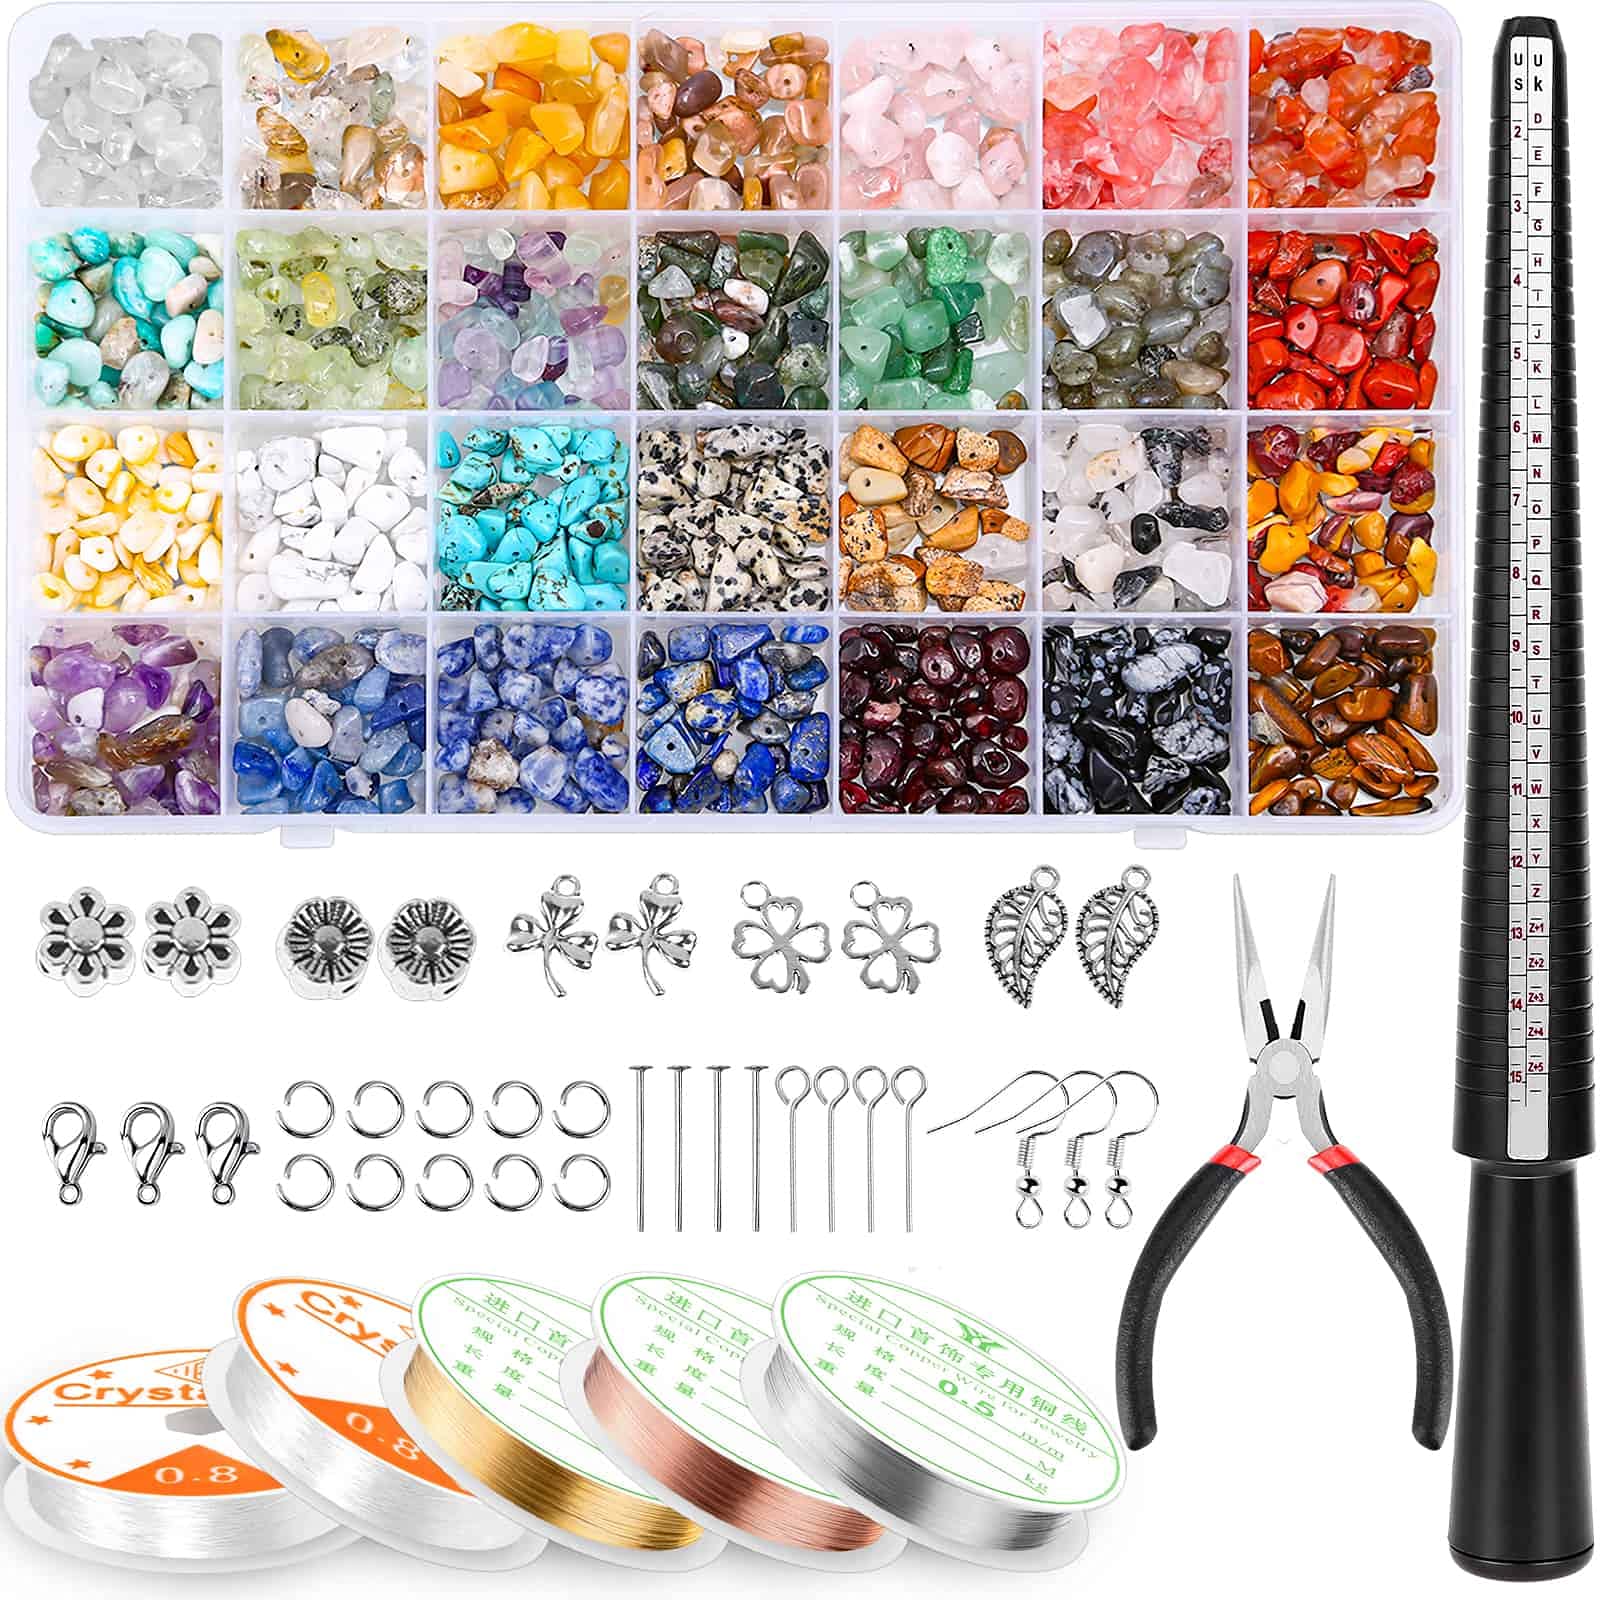 6mm Briolette Glass Beads for Jewelry Making, 21 Colors 1050Pcs Faceted  Rondelle Shape Translucent Crystal Spacer Beads Assortments Supplies for